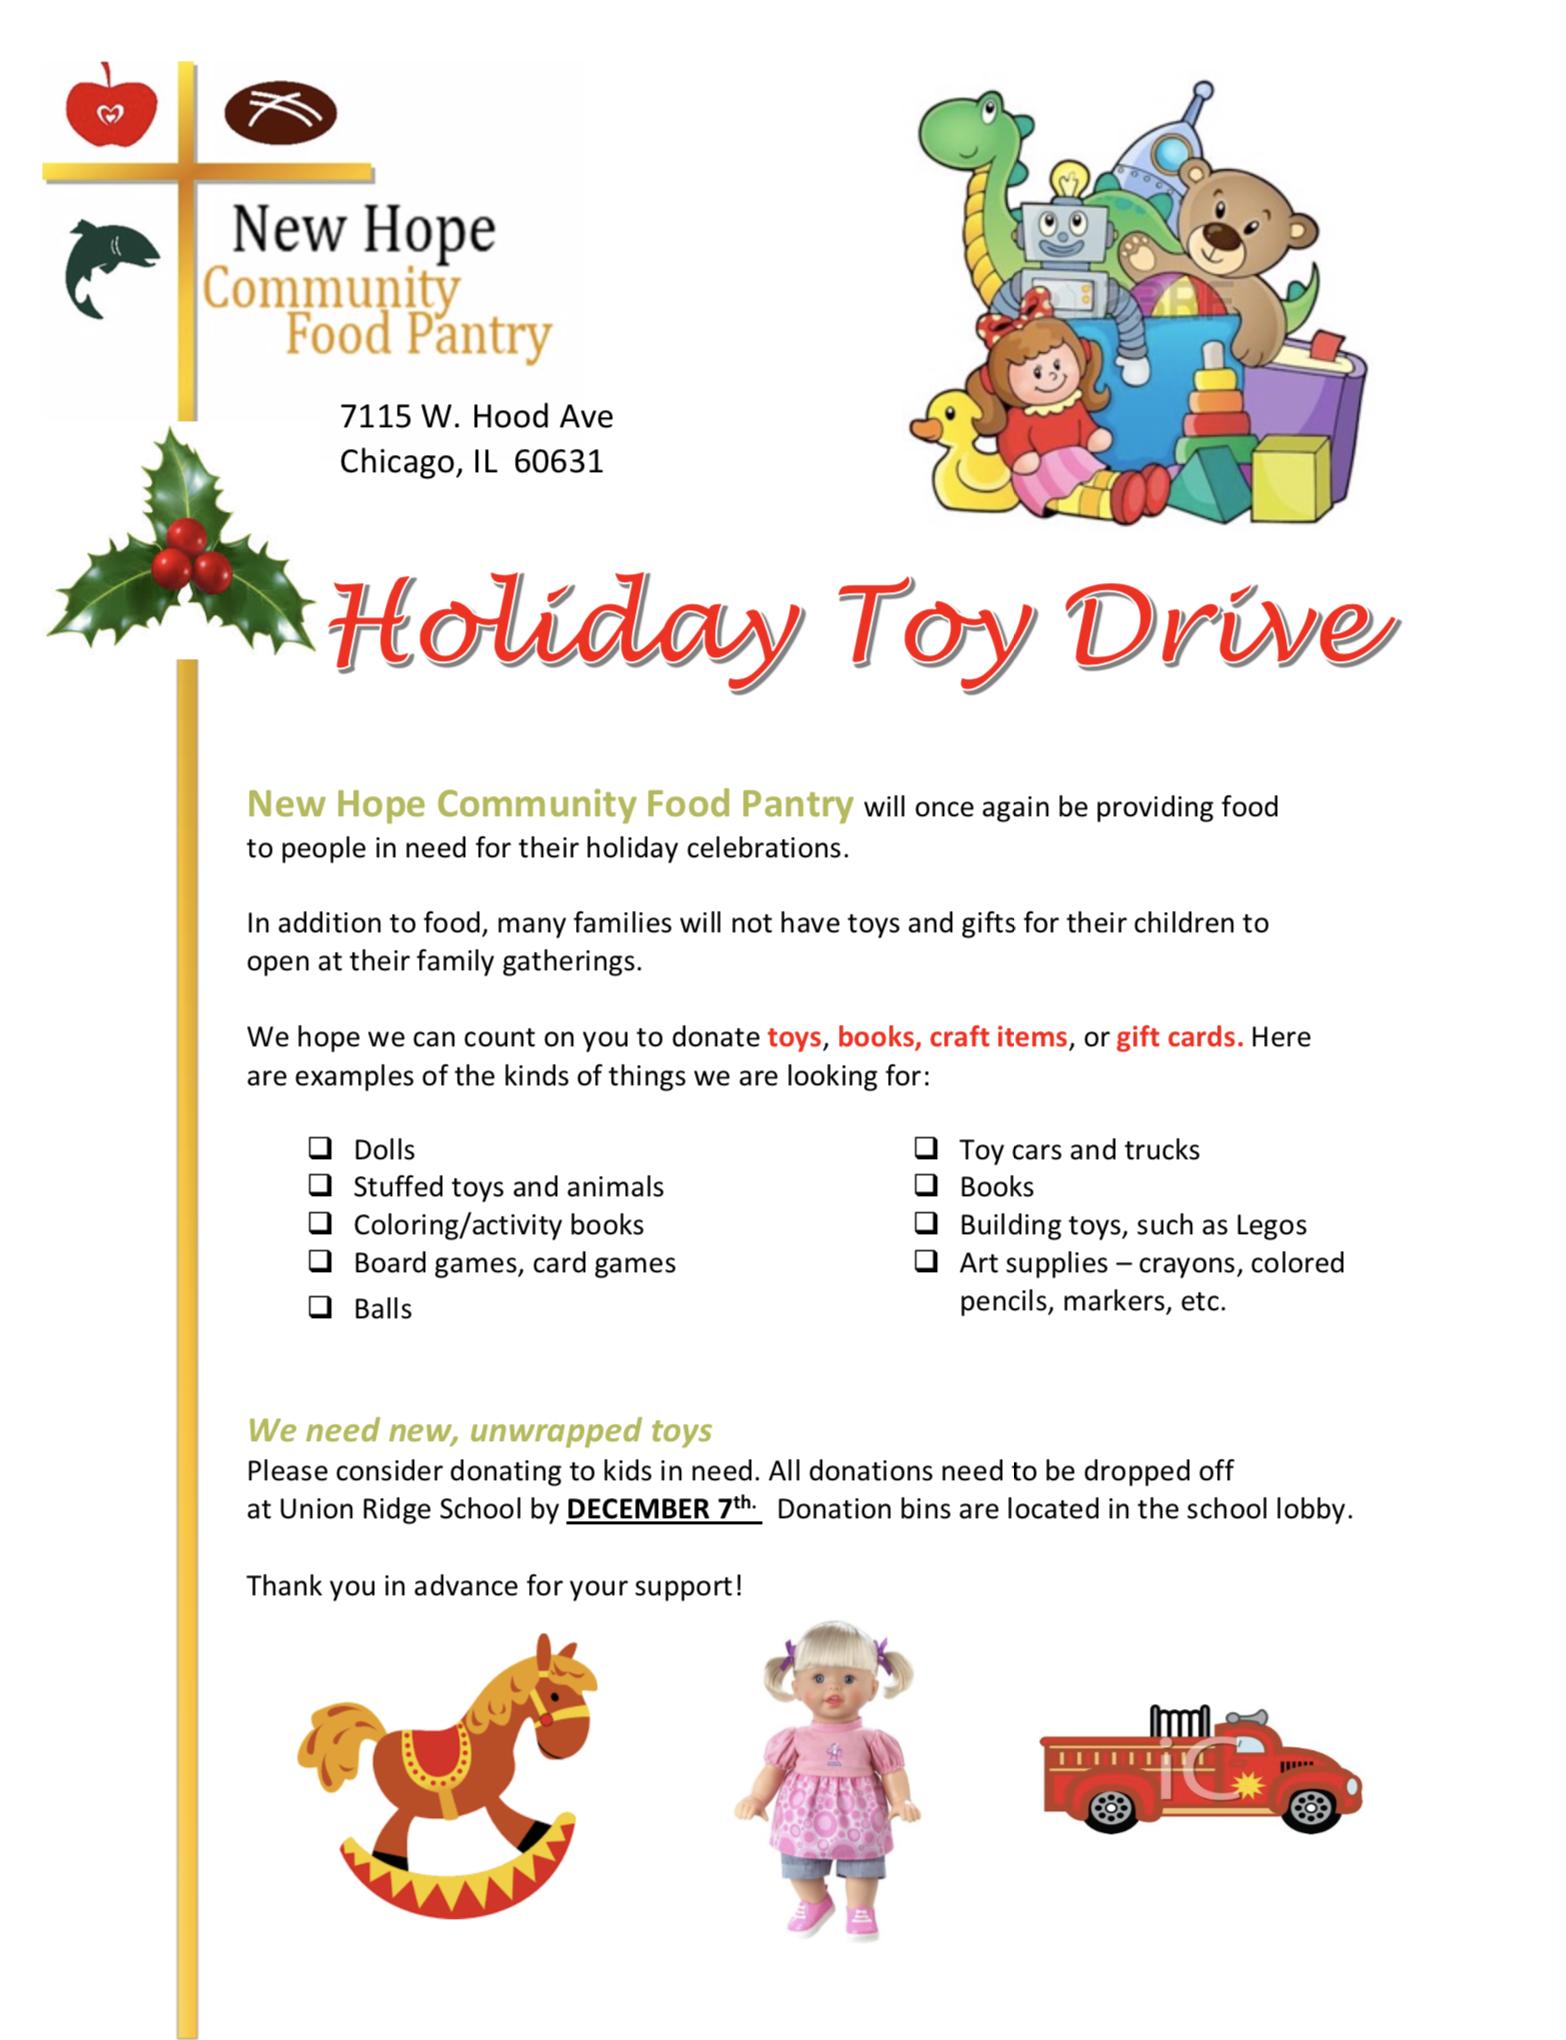 Pantry toy drive flyer